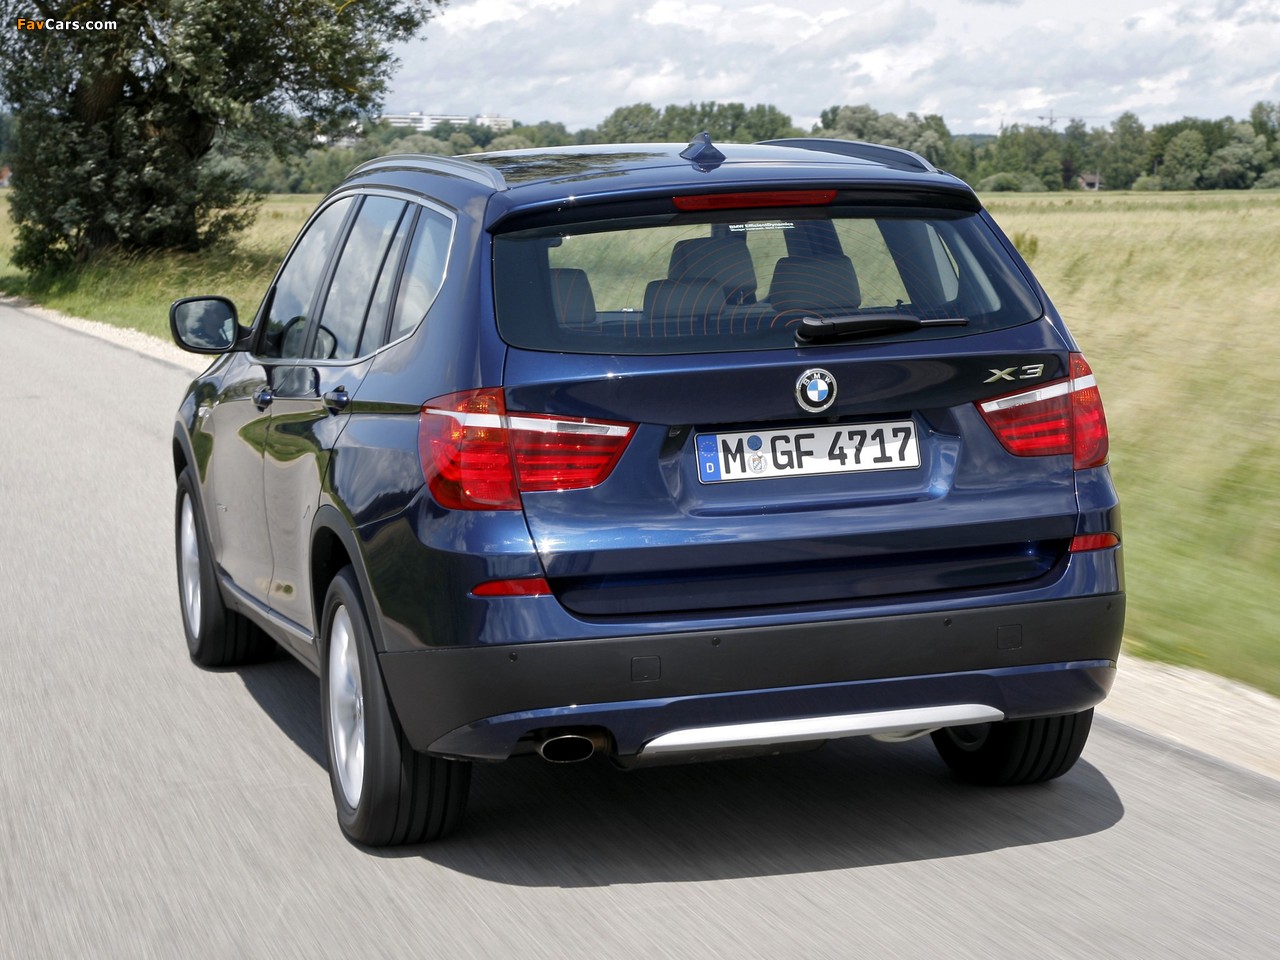 BMW X3 xDrive20i (F25) 2011 pictures (1280 x 960)